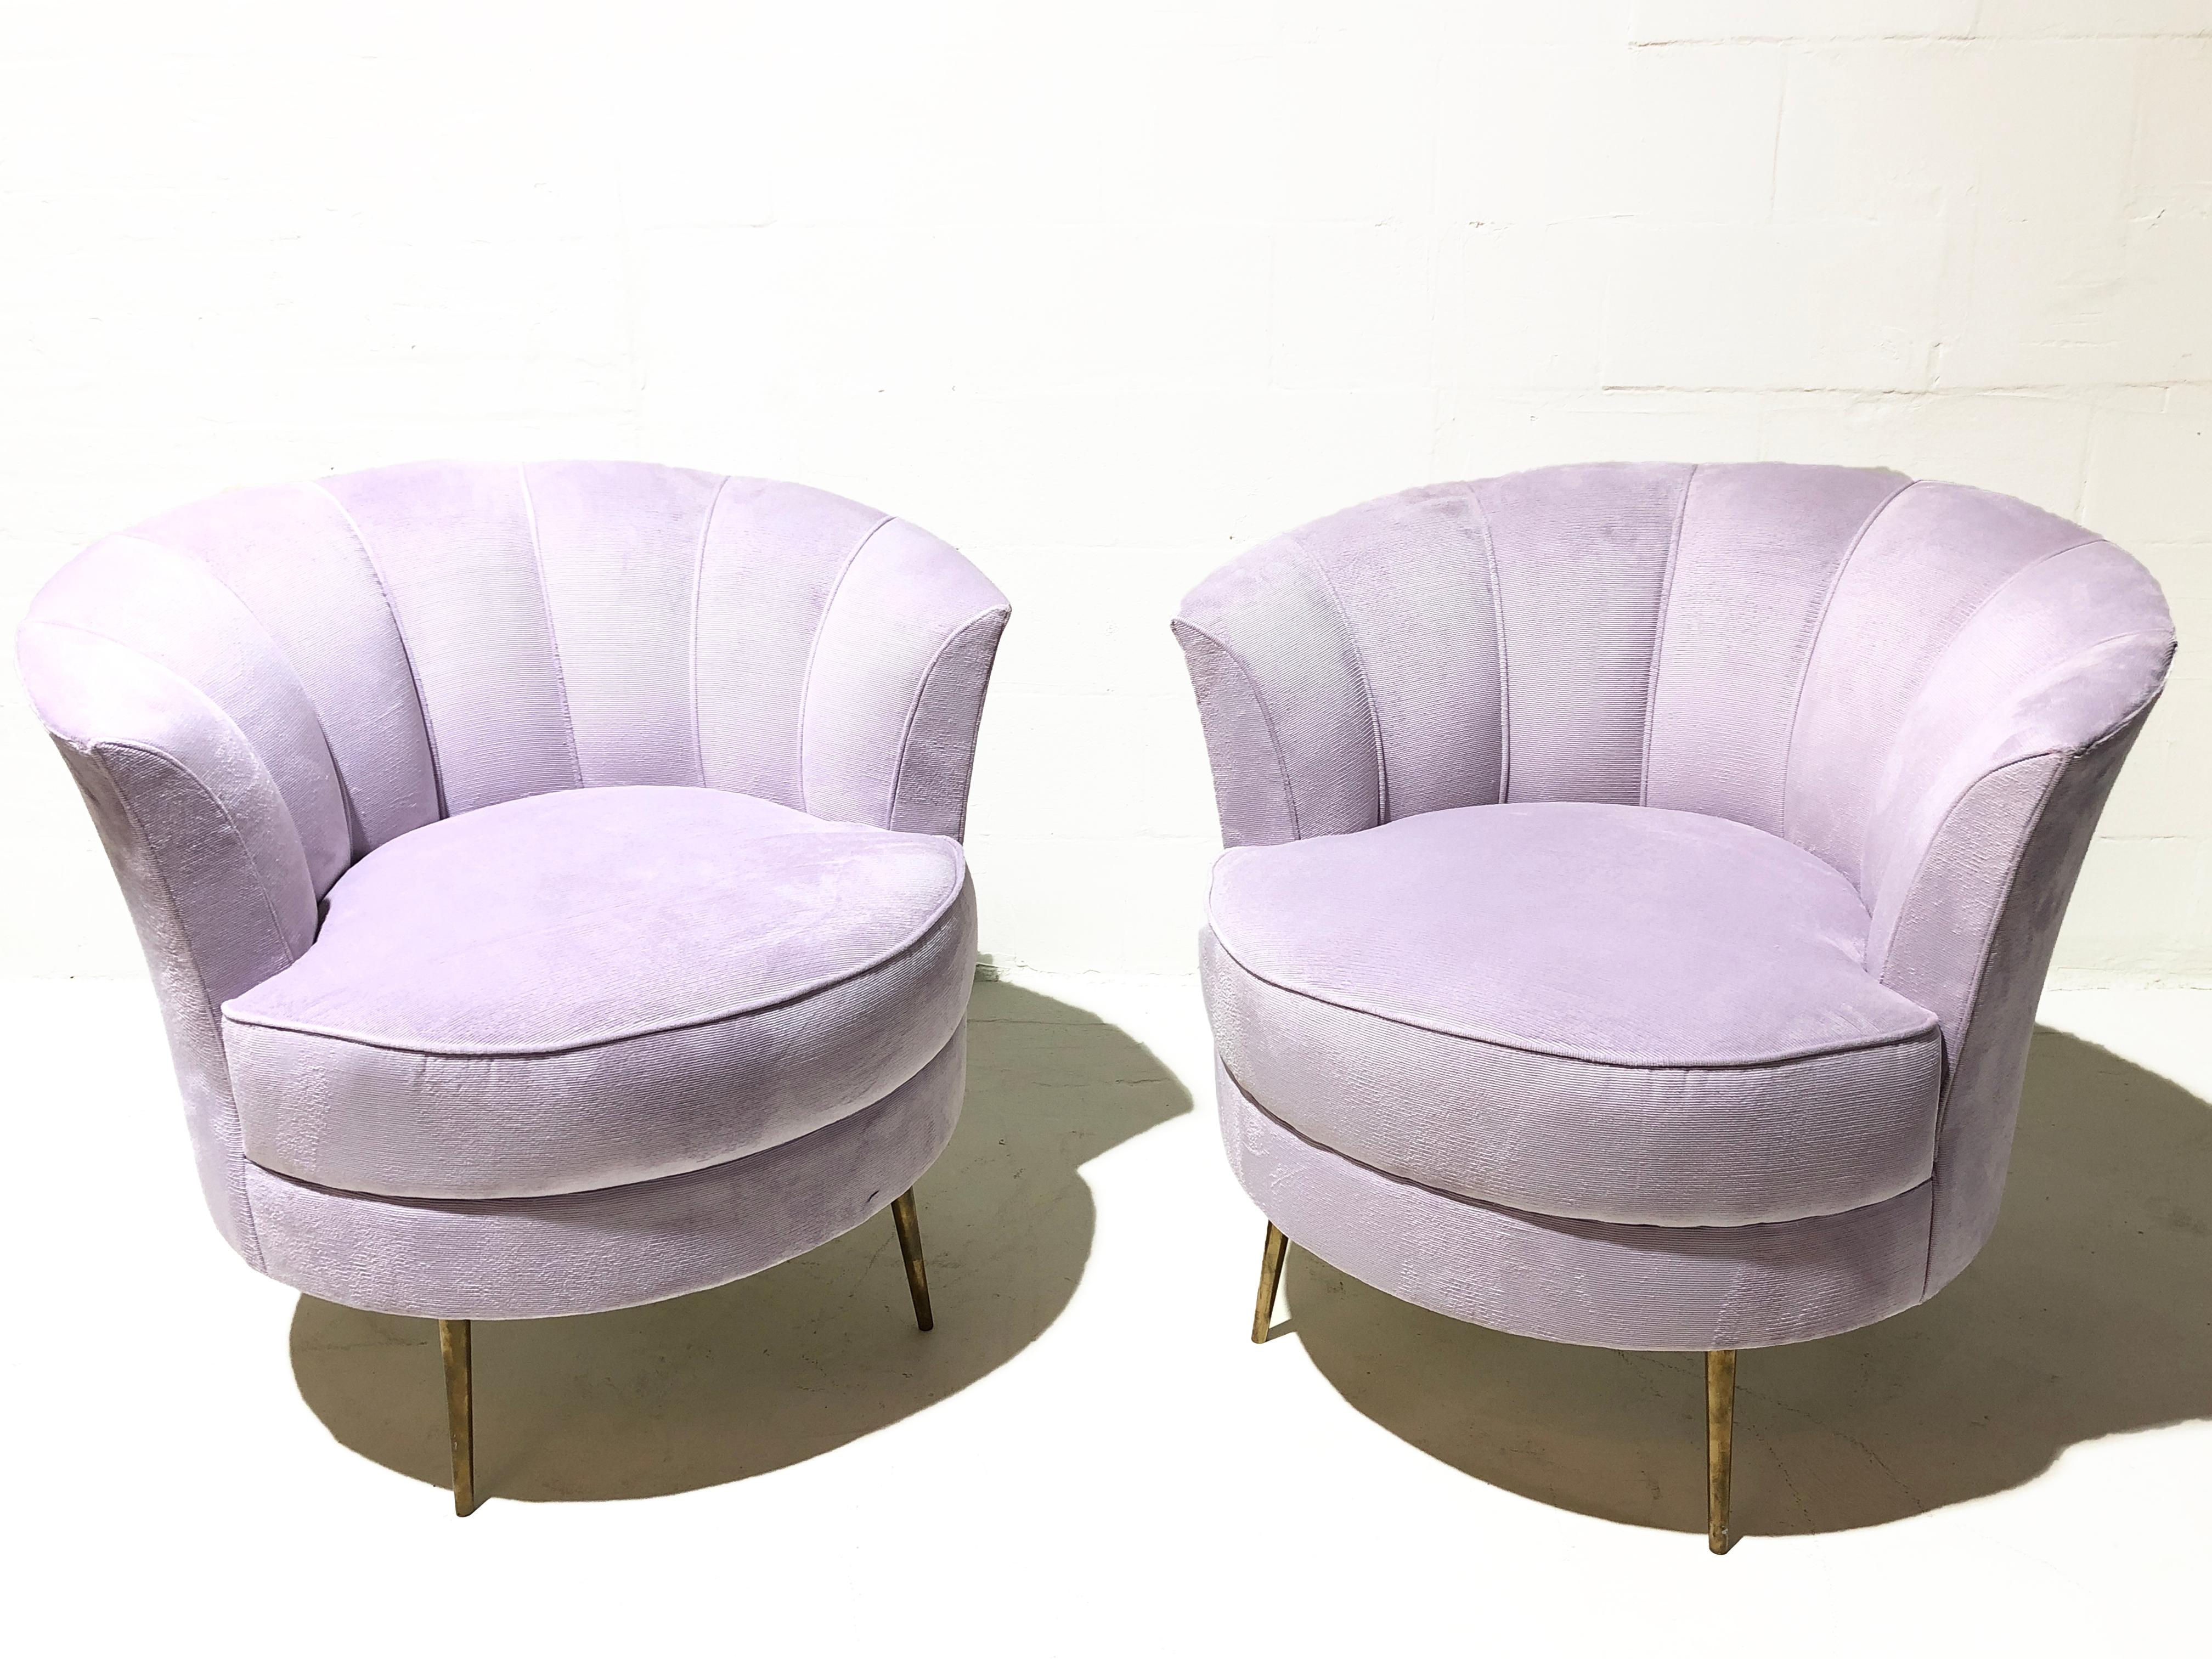 These vintage 1960's club chairs feature transitional Italian styling and solid brass lags. The fabric is a synthetic velvet in a pale violet color.